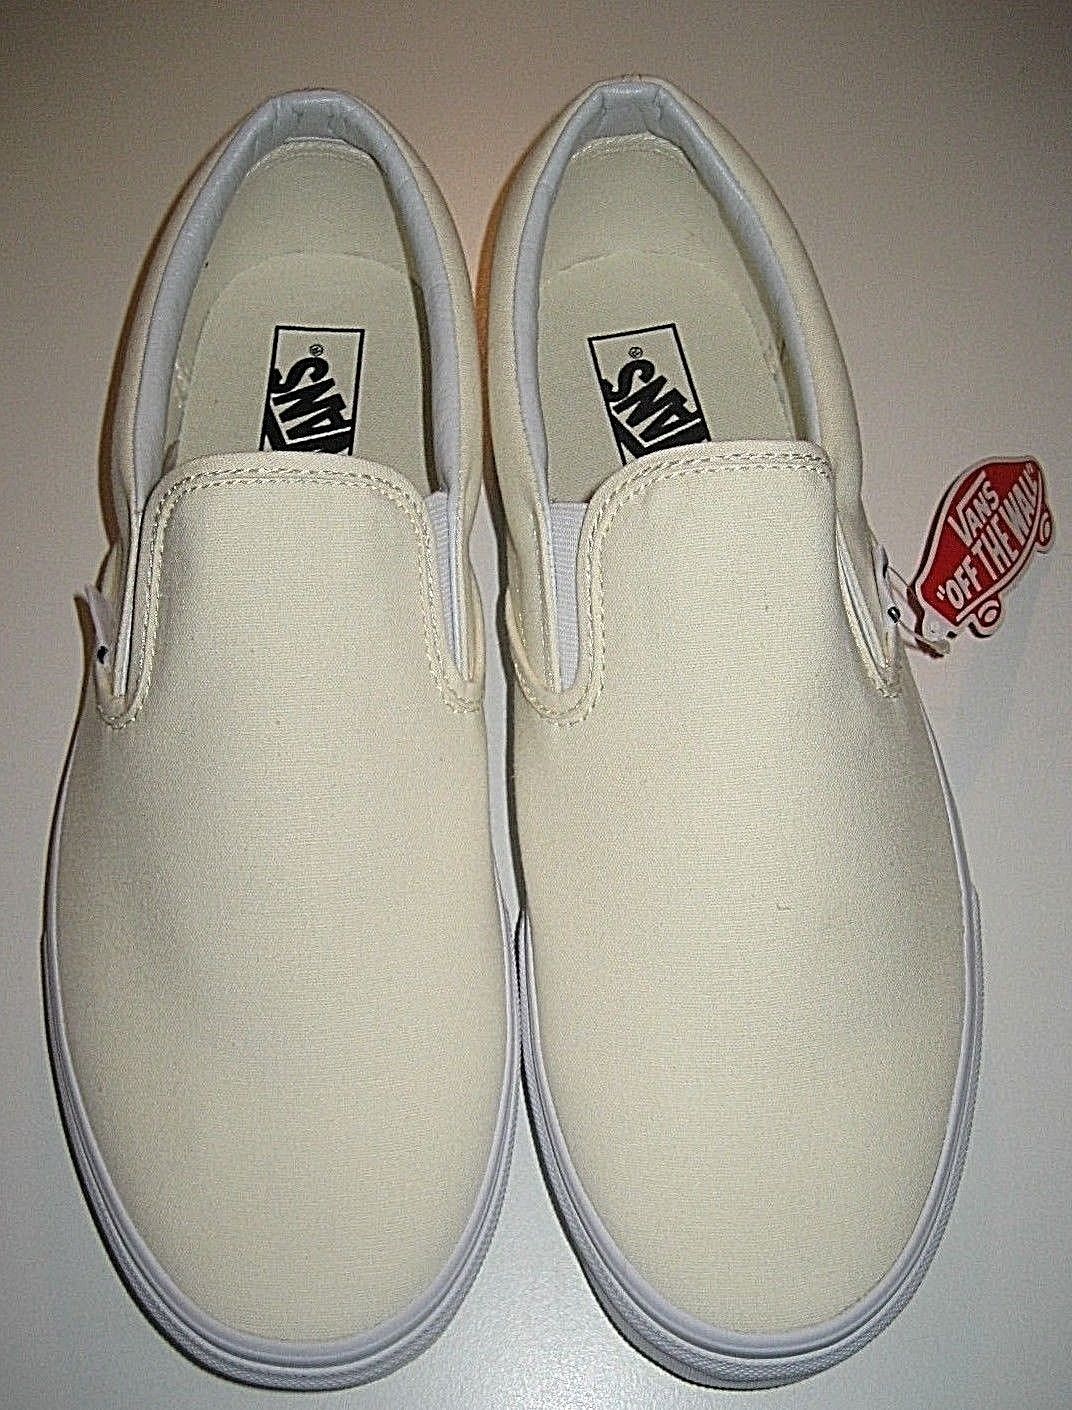 Vans Classic Slip on Mens Canvas Off White Skate Boat shoes Size 8.5 ...